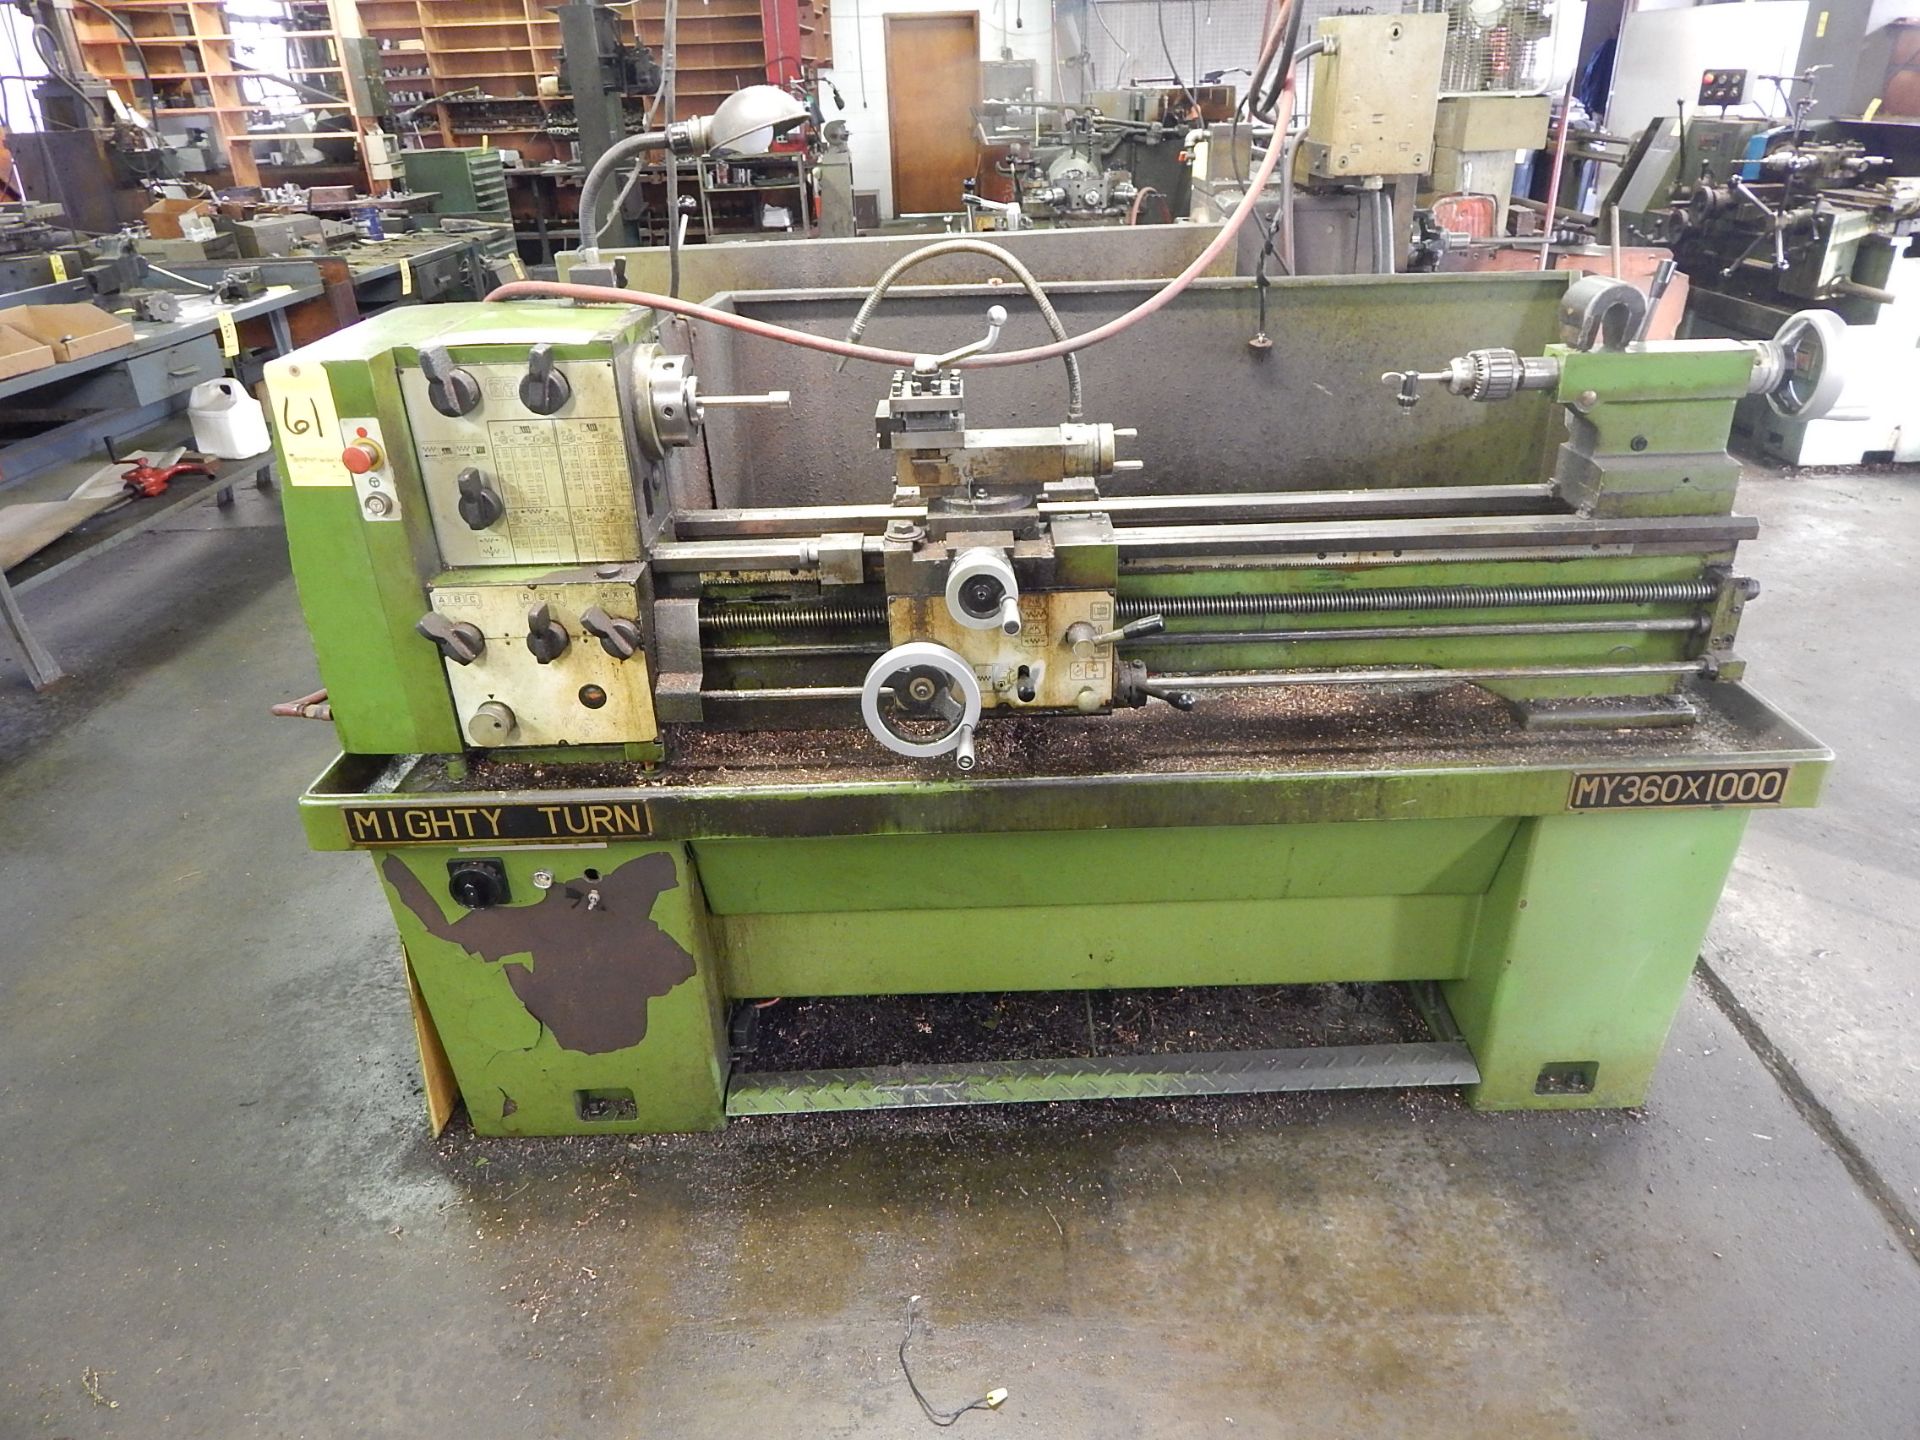 Mighty Turn MY 360 X 1000 Tool Room Lathe, 14" X 40", s/n 22066, 5C Collet Nose, Loading Fee $100.00